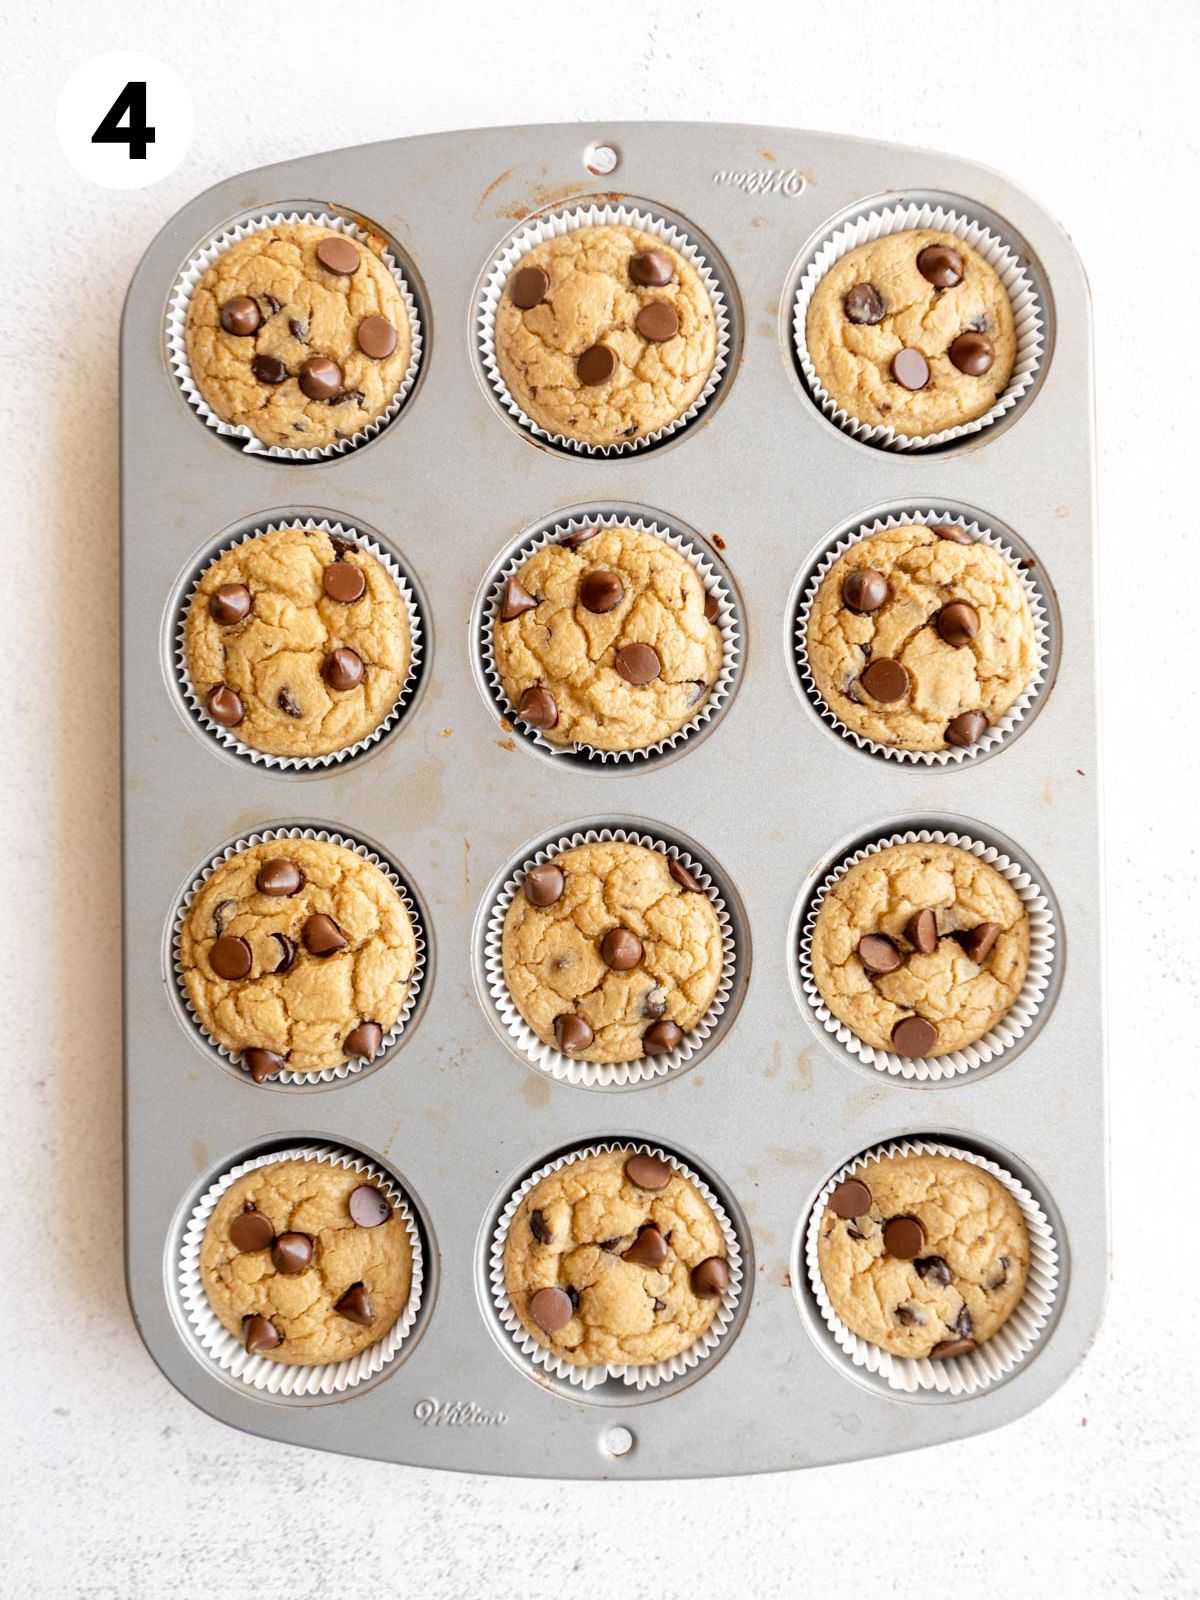 Low Calorie Banana Oat Muffins are made with no flour or oil and no added sugar. A healthy muffin made in a blender, moist and delicious! Low Calorie + Gluten Free